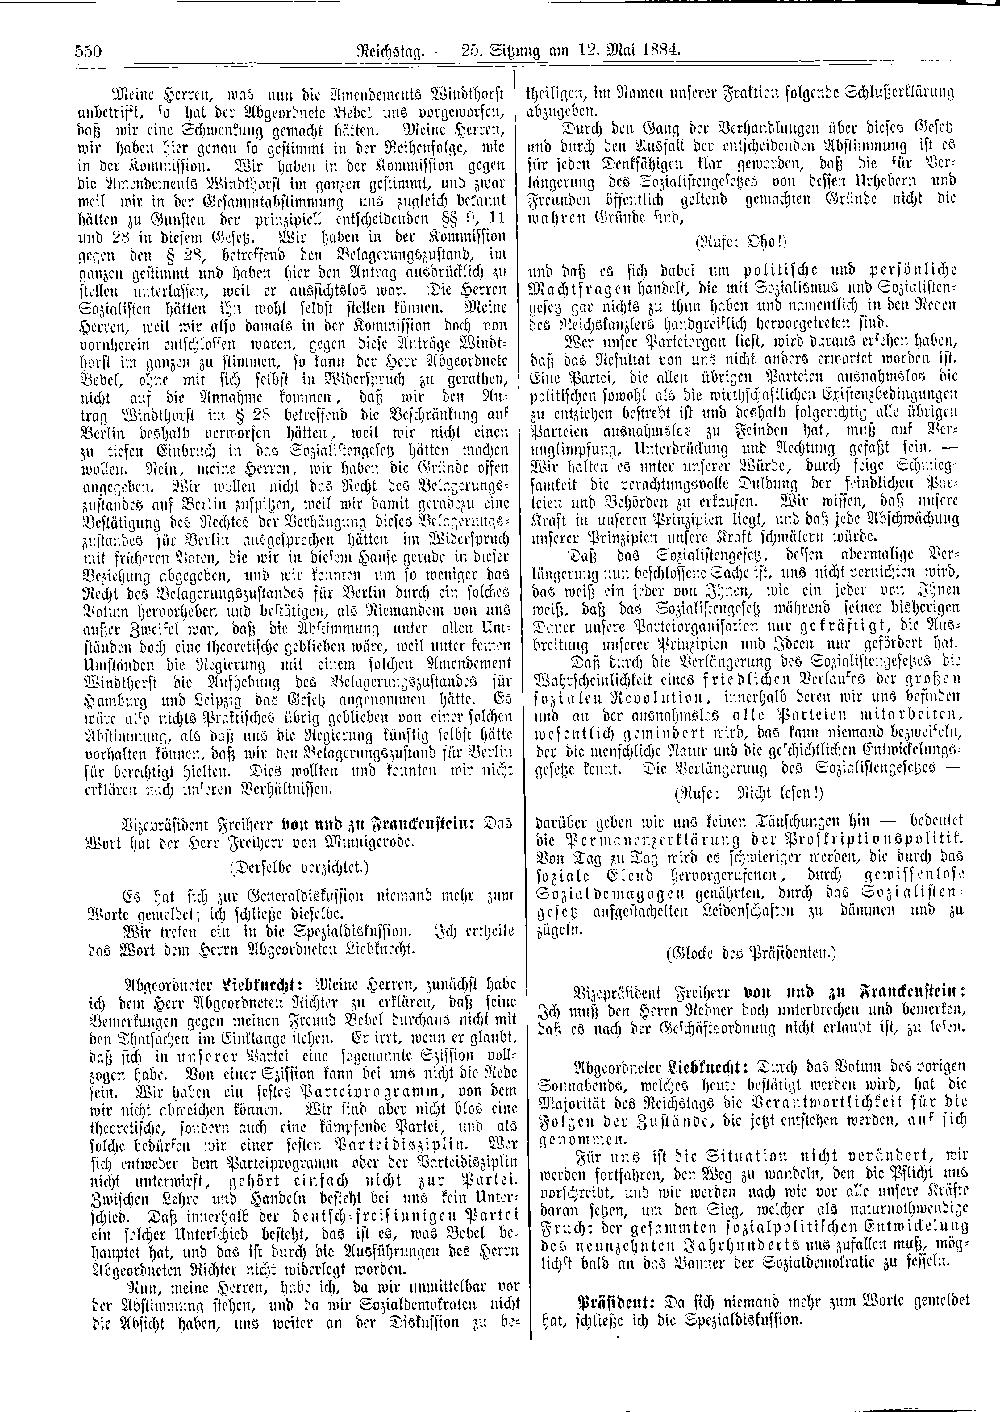 Scan of page 550